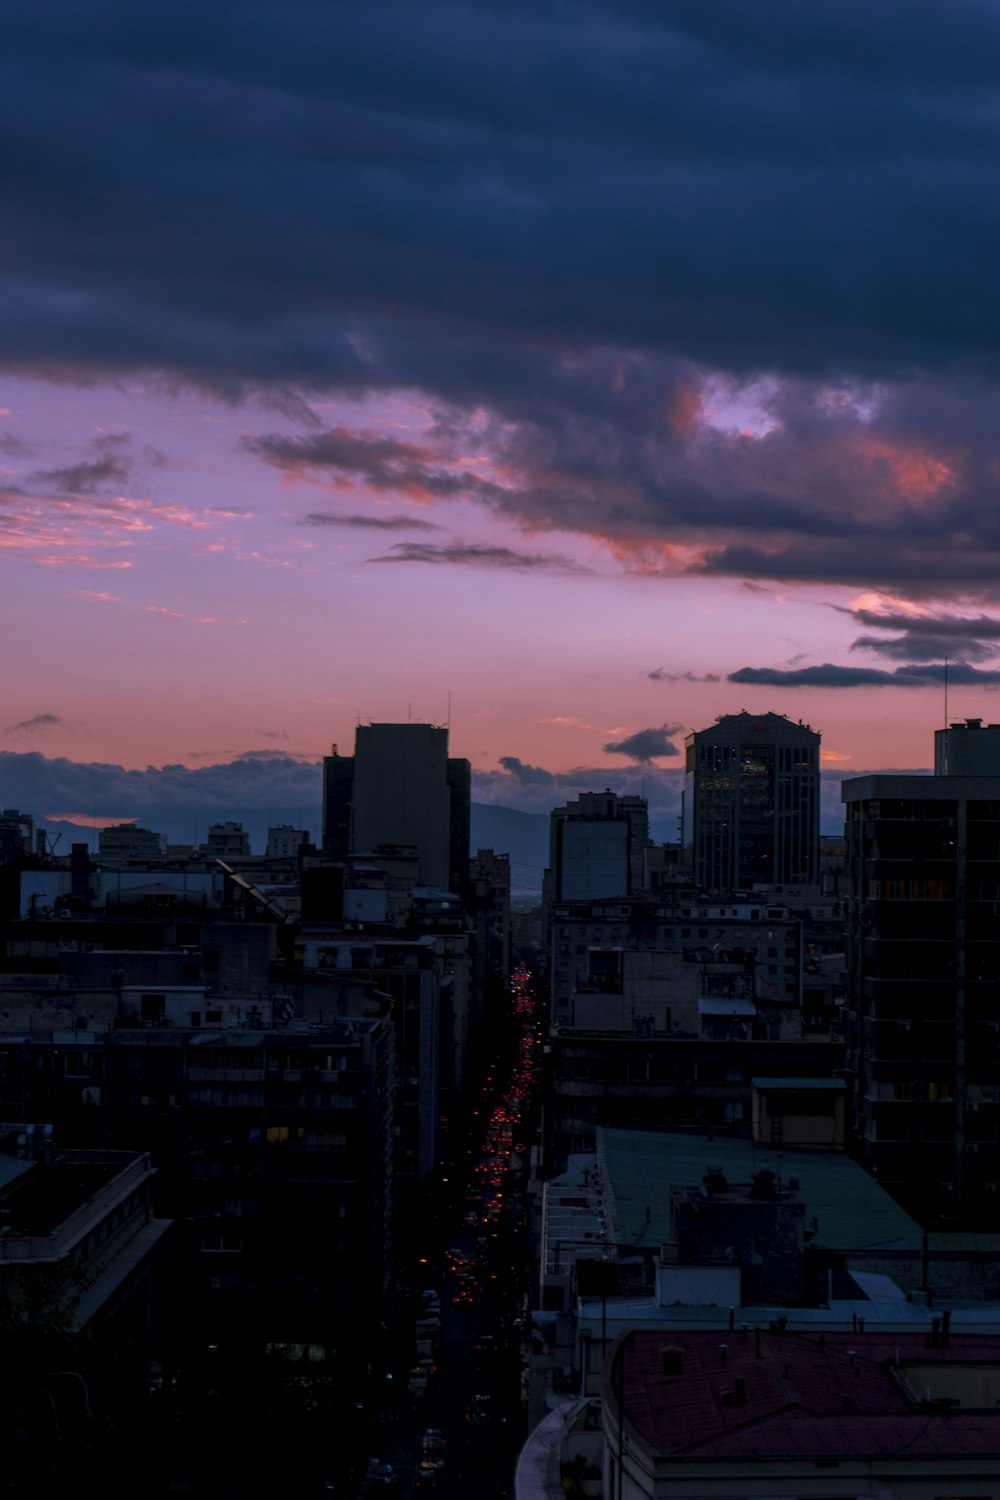 grey clouds looming above the city during sunset